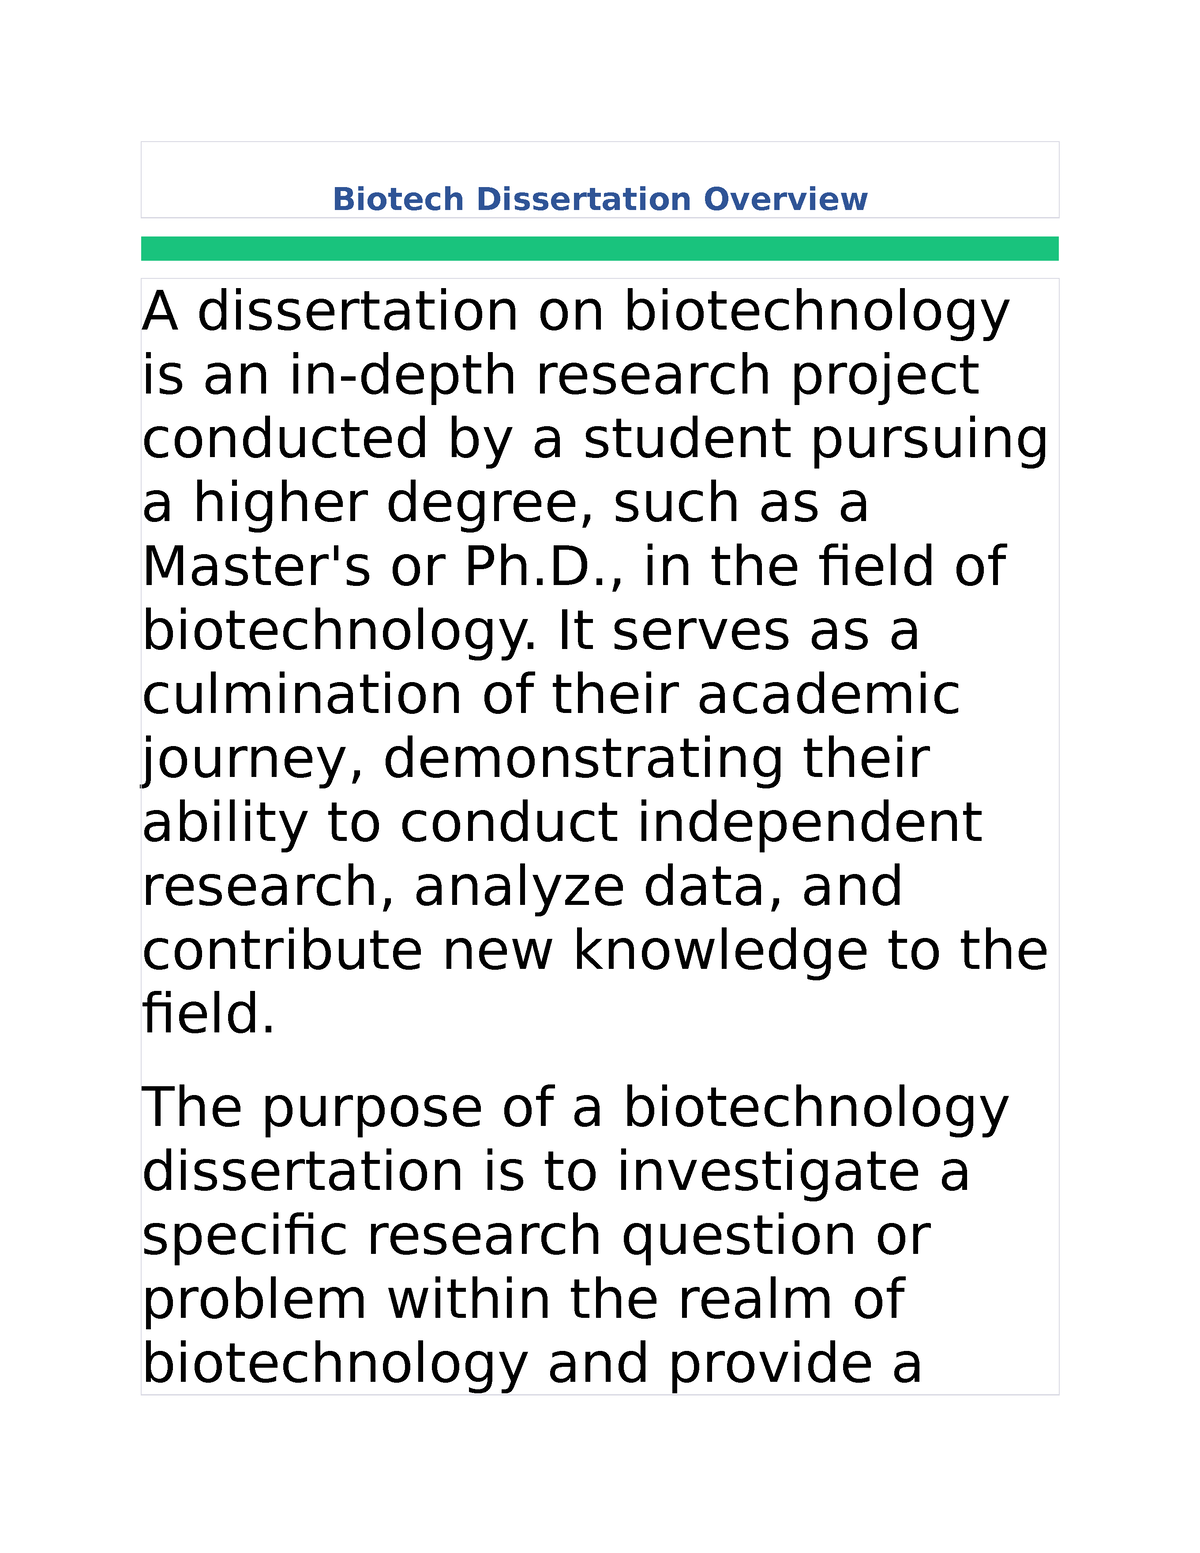 dissertation project in biotechnology